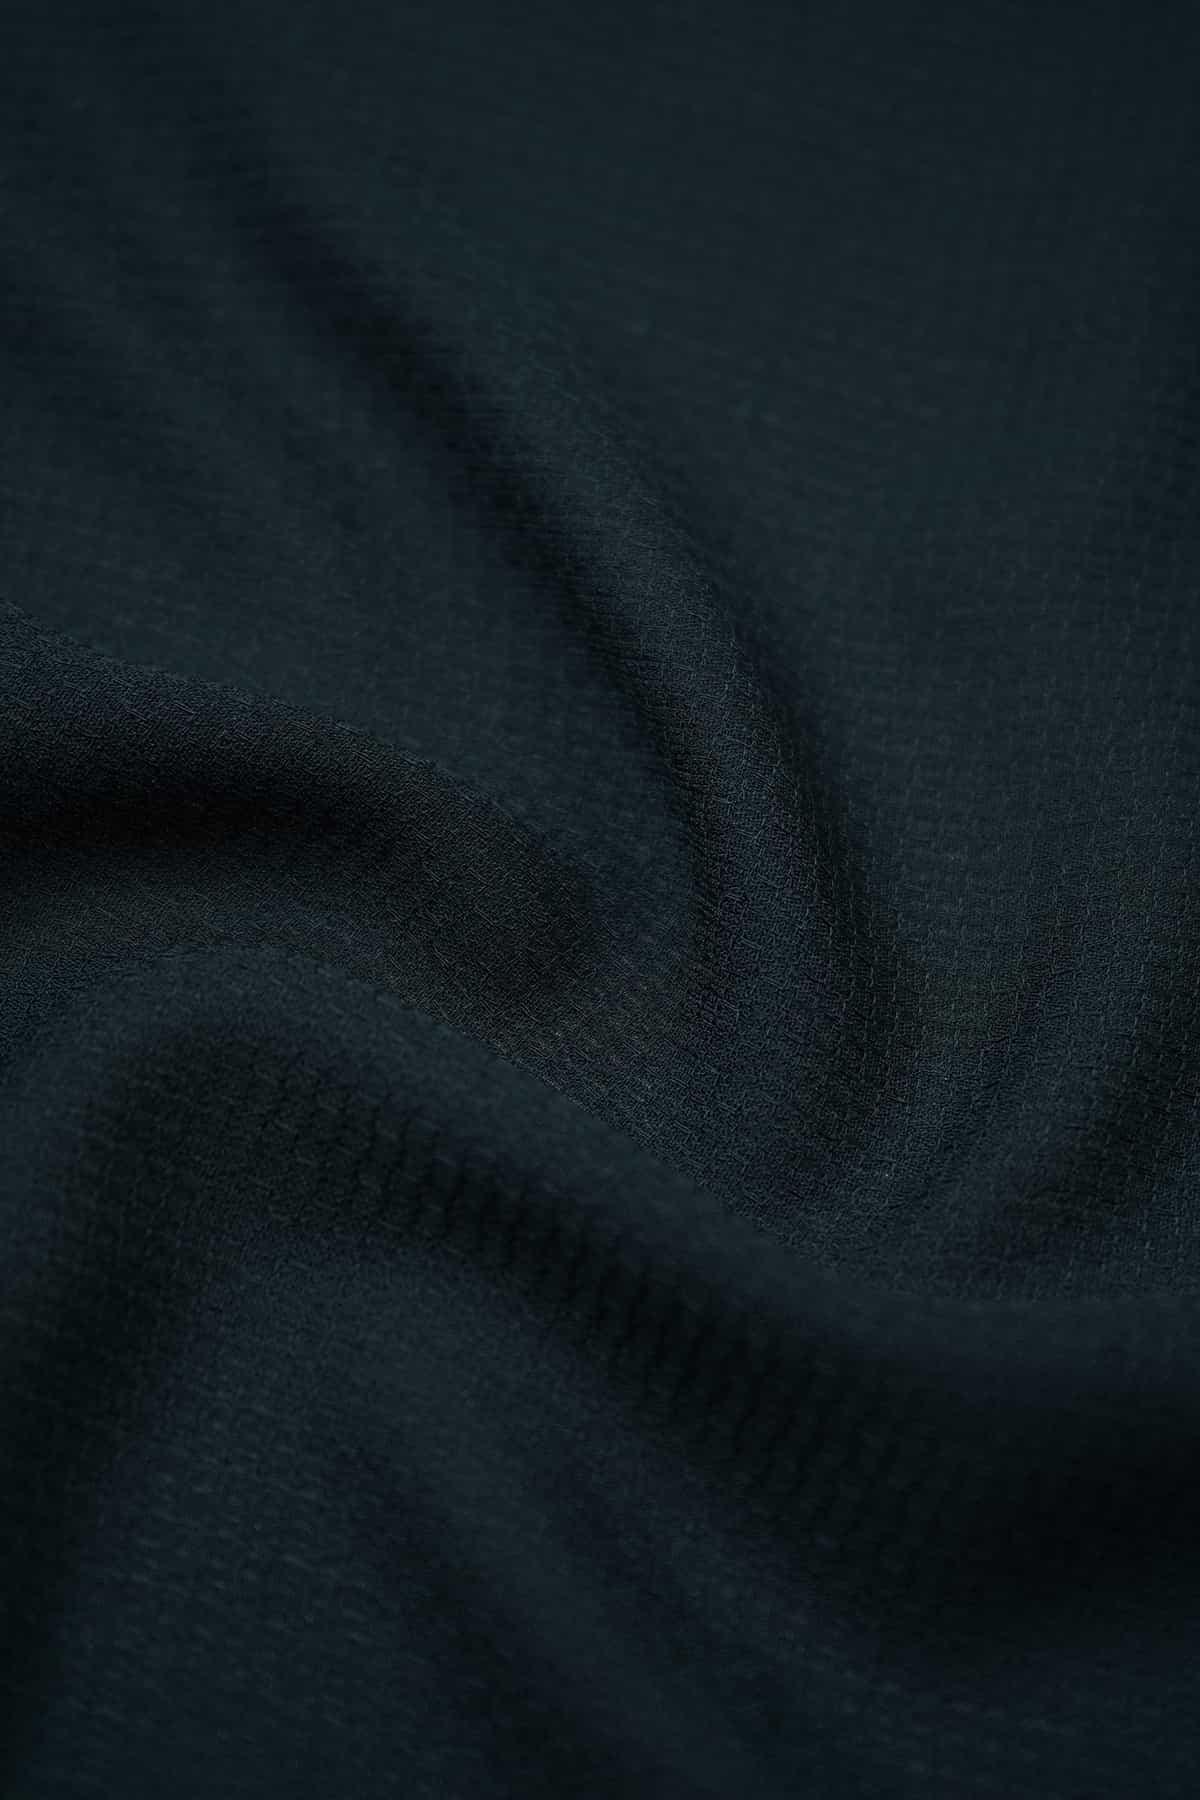 Plain Dyed Manya - saraaha.com - Casual, Casual Wear, Color Variety, Comfy Casual, comfy casuals, Formal Wear, Heavy Weight, Indo Western, Kurta, Long Dresses, Men Wear, Men's wear collection, One Pieces, Plain Dyed, Polyester, Shirt, Suits, Western, Western Dresses, Women Wear